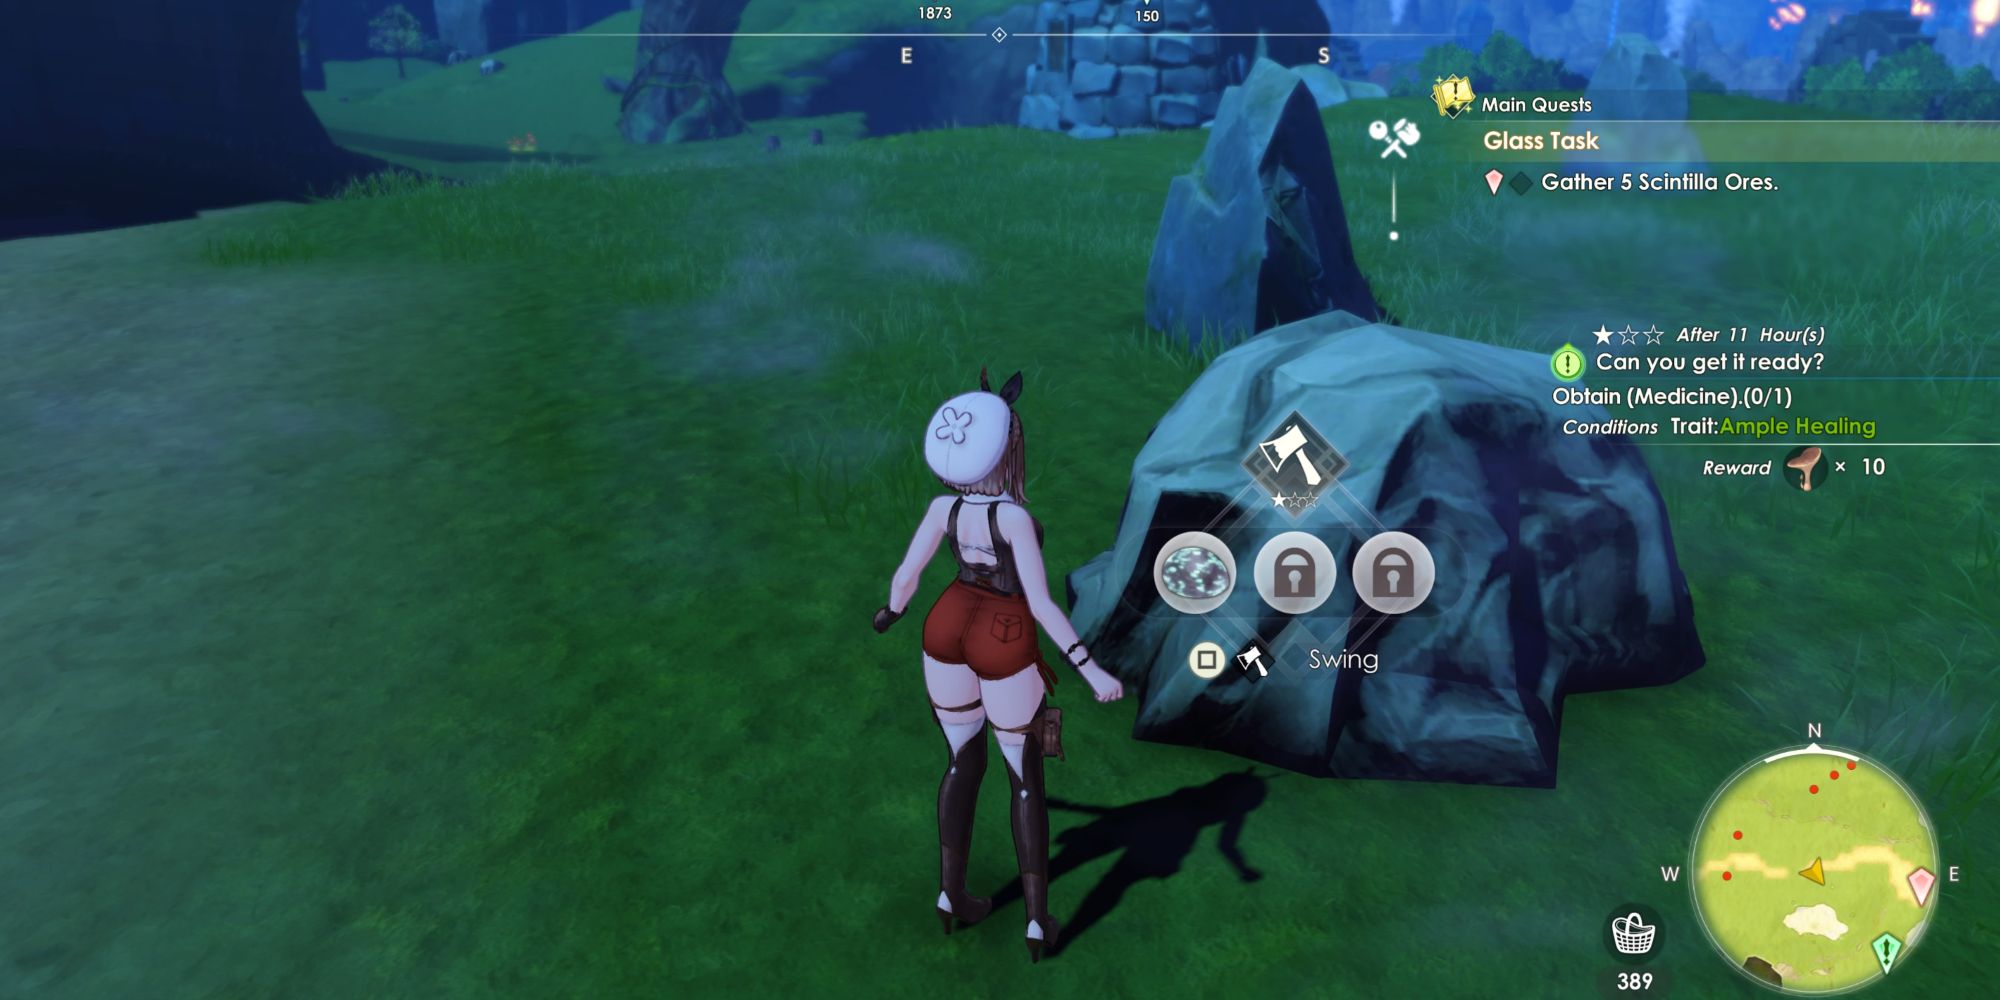 Ryza viewing the Materials she will get from the Boulder if she uses the Axe Survival Tool on it in Atelier Ryza 3: Alchemist Of The End & The Secret Key